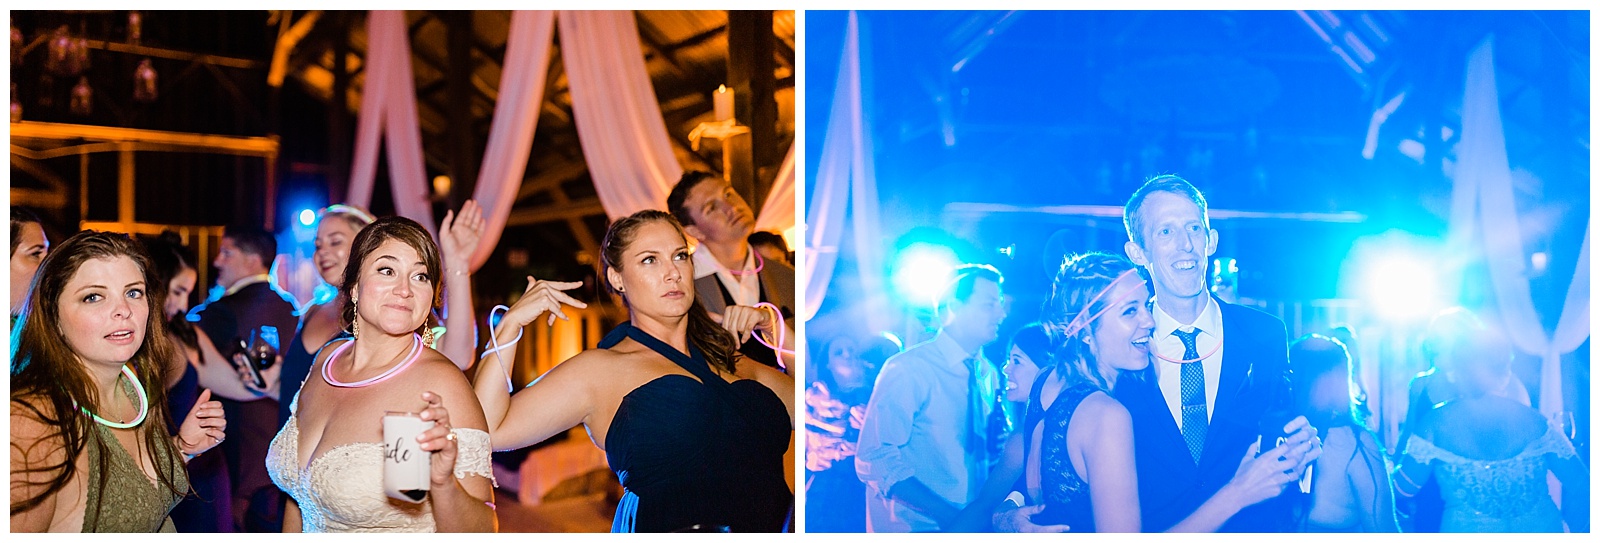 guests dancing at a wedding reception with glow sticks